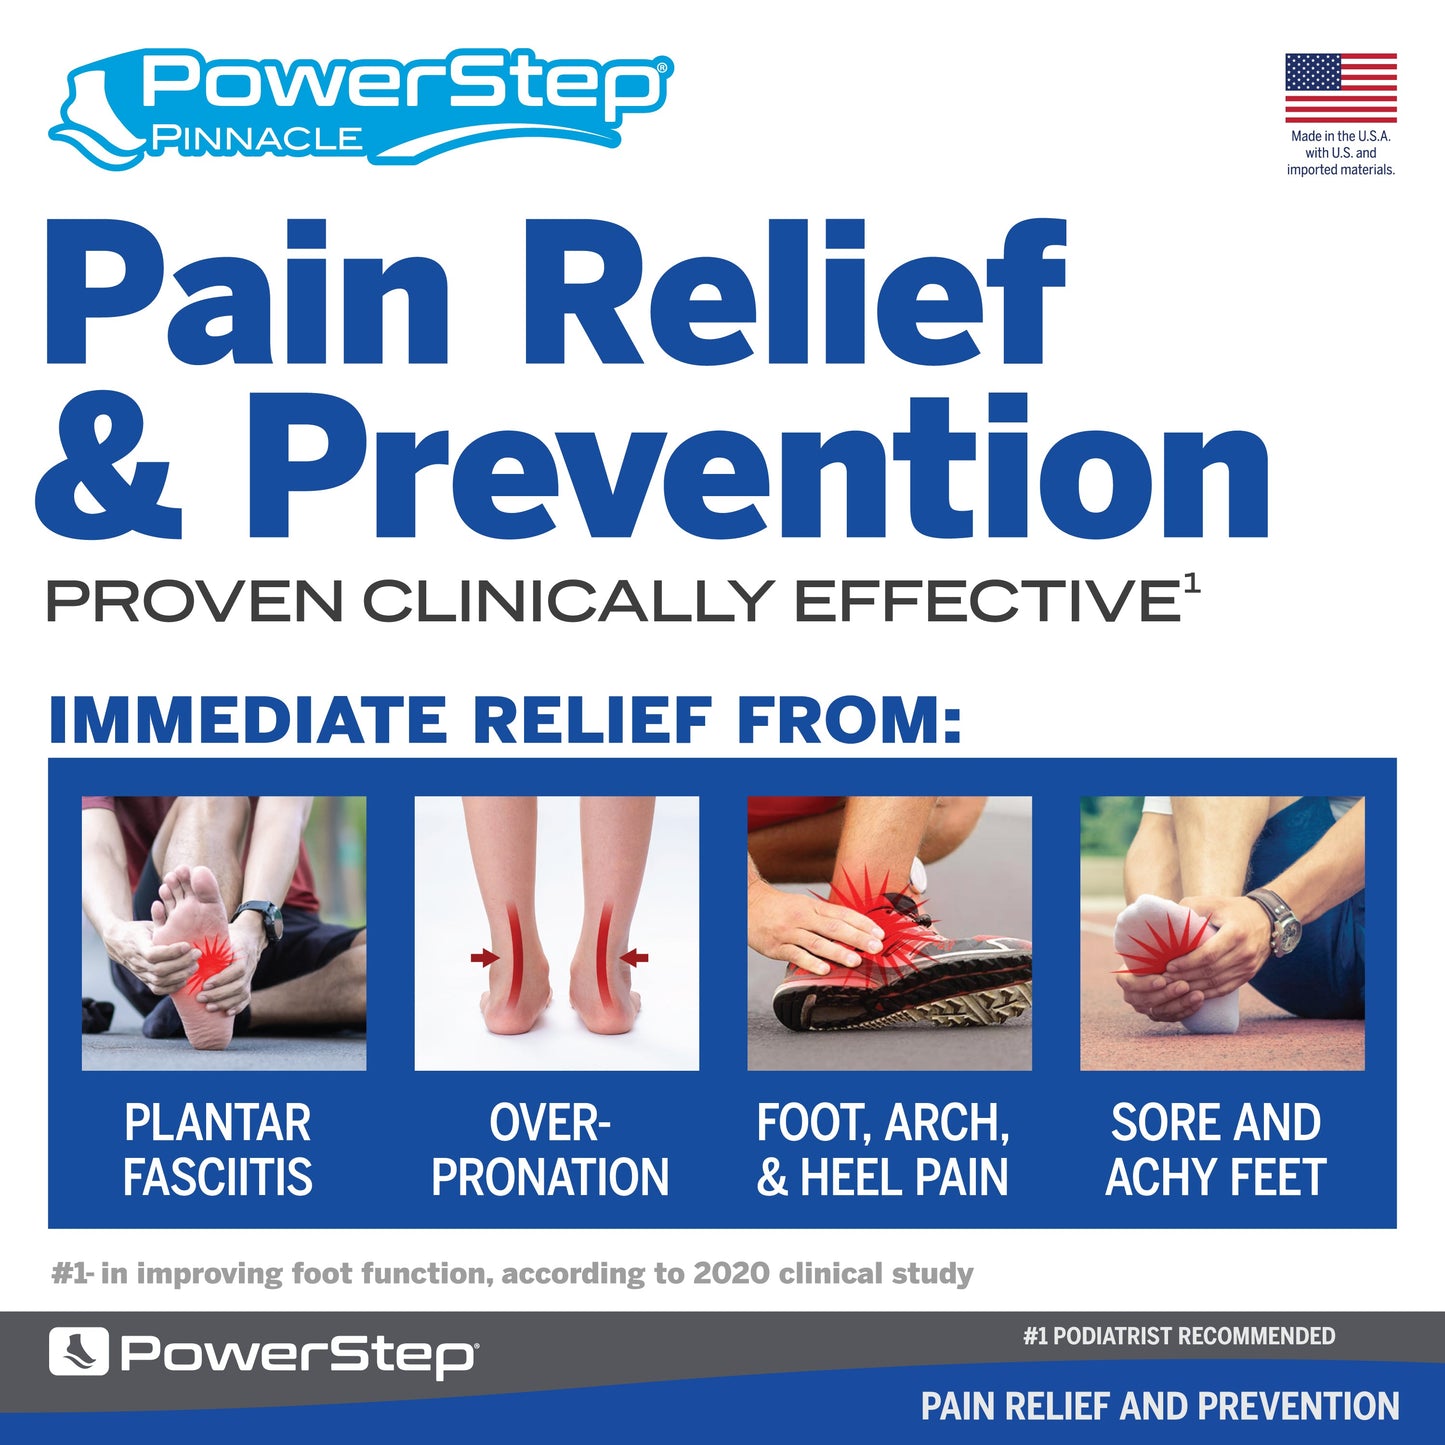 PowerStep Pinnacle Orthotic Shoe Insoles, Made in the USA with US and imported materials, pain relief and prevention, proven clinically effective for immediate relief from plantar fasciitis, overpronation, foot, arch, and heel pain, sore, achy feet, number one in improving foot function according to 2020 clinical study, number one podiatrist recommended shoe orthotic for arch support, women’s shoe inserts, men’s orthotic shoe insoles, unisex orthotic arch support insoles